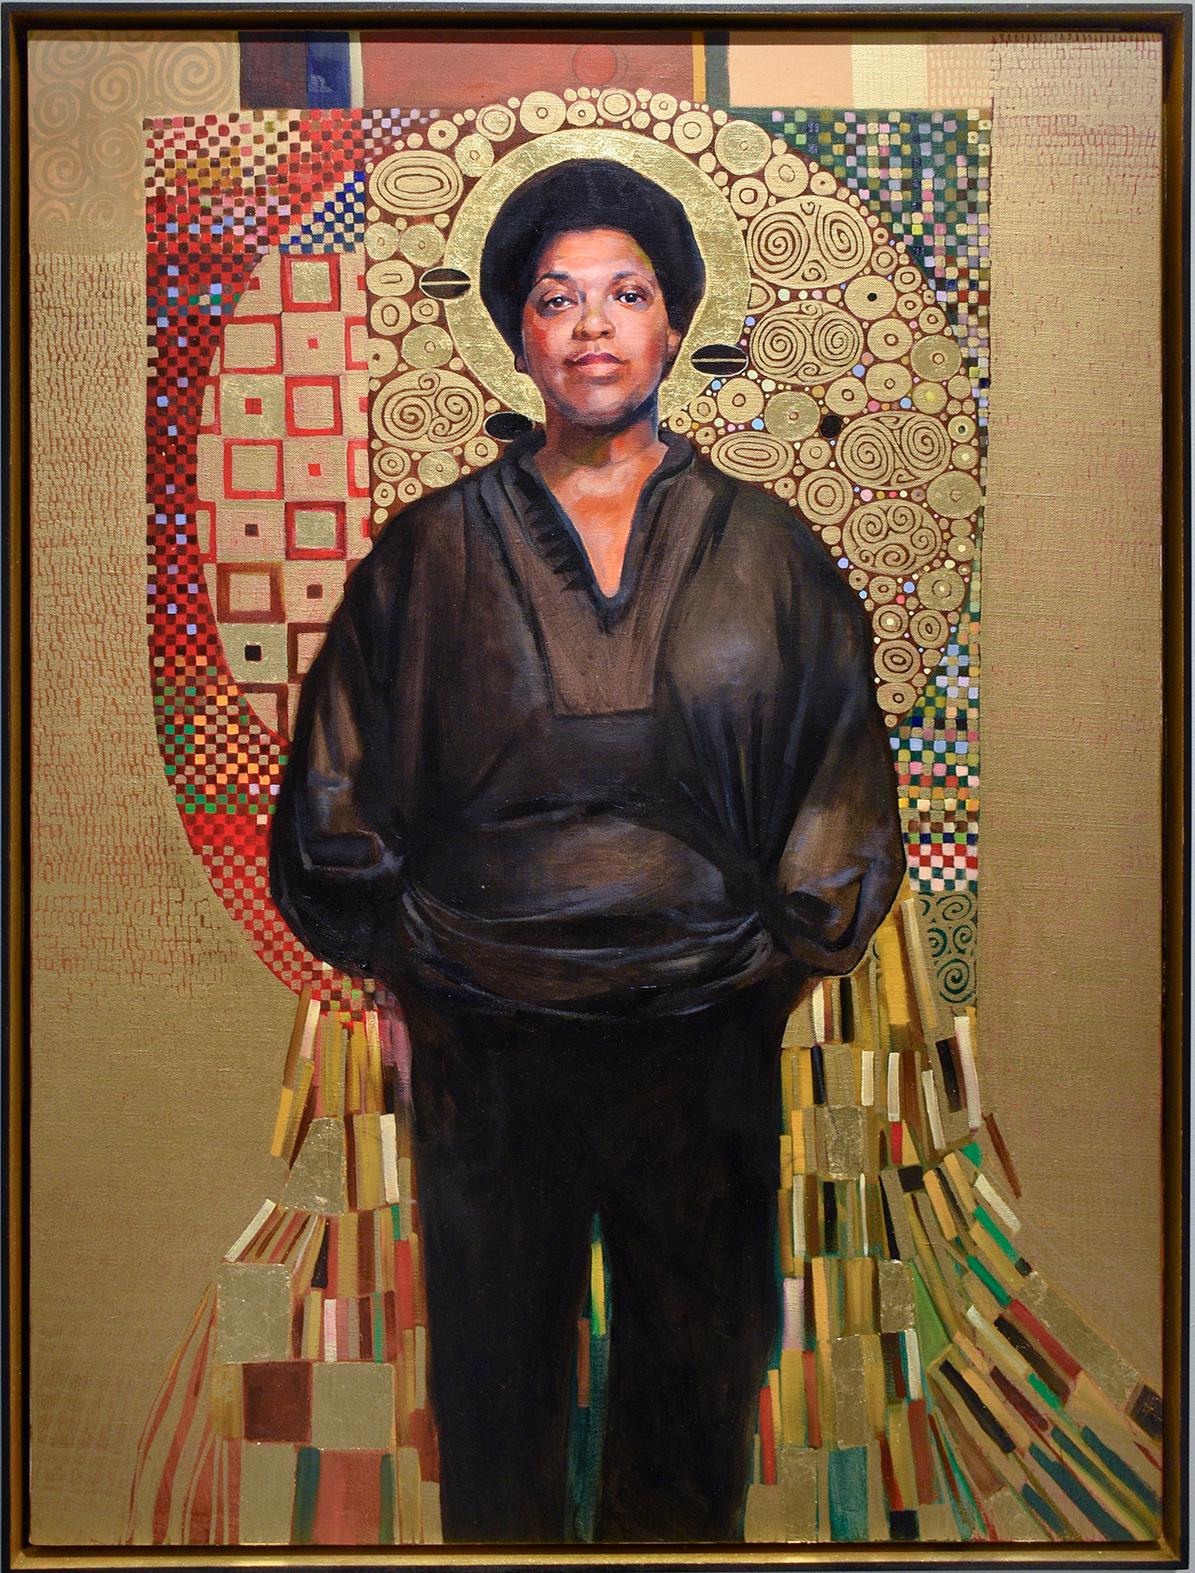 Carl Grauer Portrait Painting - Audre Lorde (Gustav Klimt Inspired Figurative Painting of LGBTQ Icon, Framed)